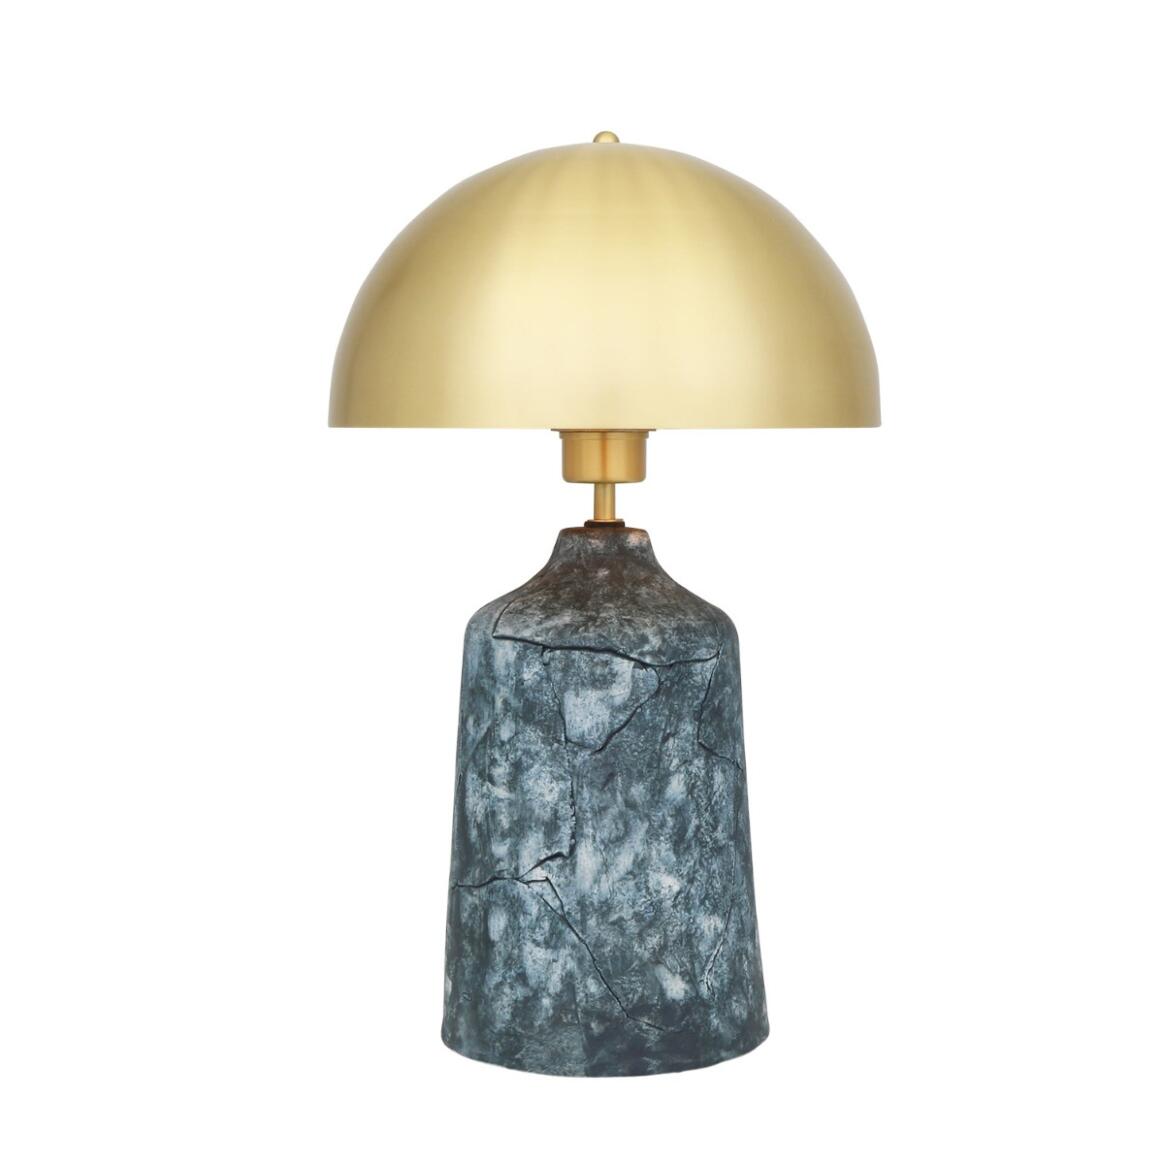 Cassia Tall Ceramic Table Lamp with Brass Dome Shade, Blue Earth main product image